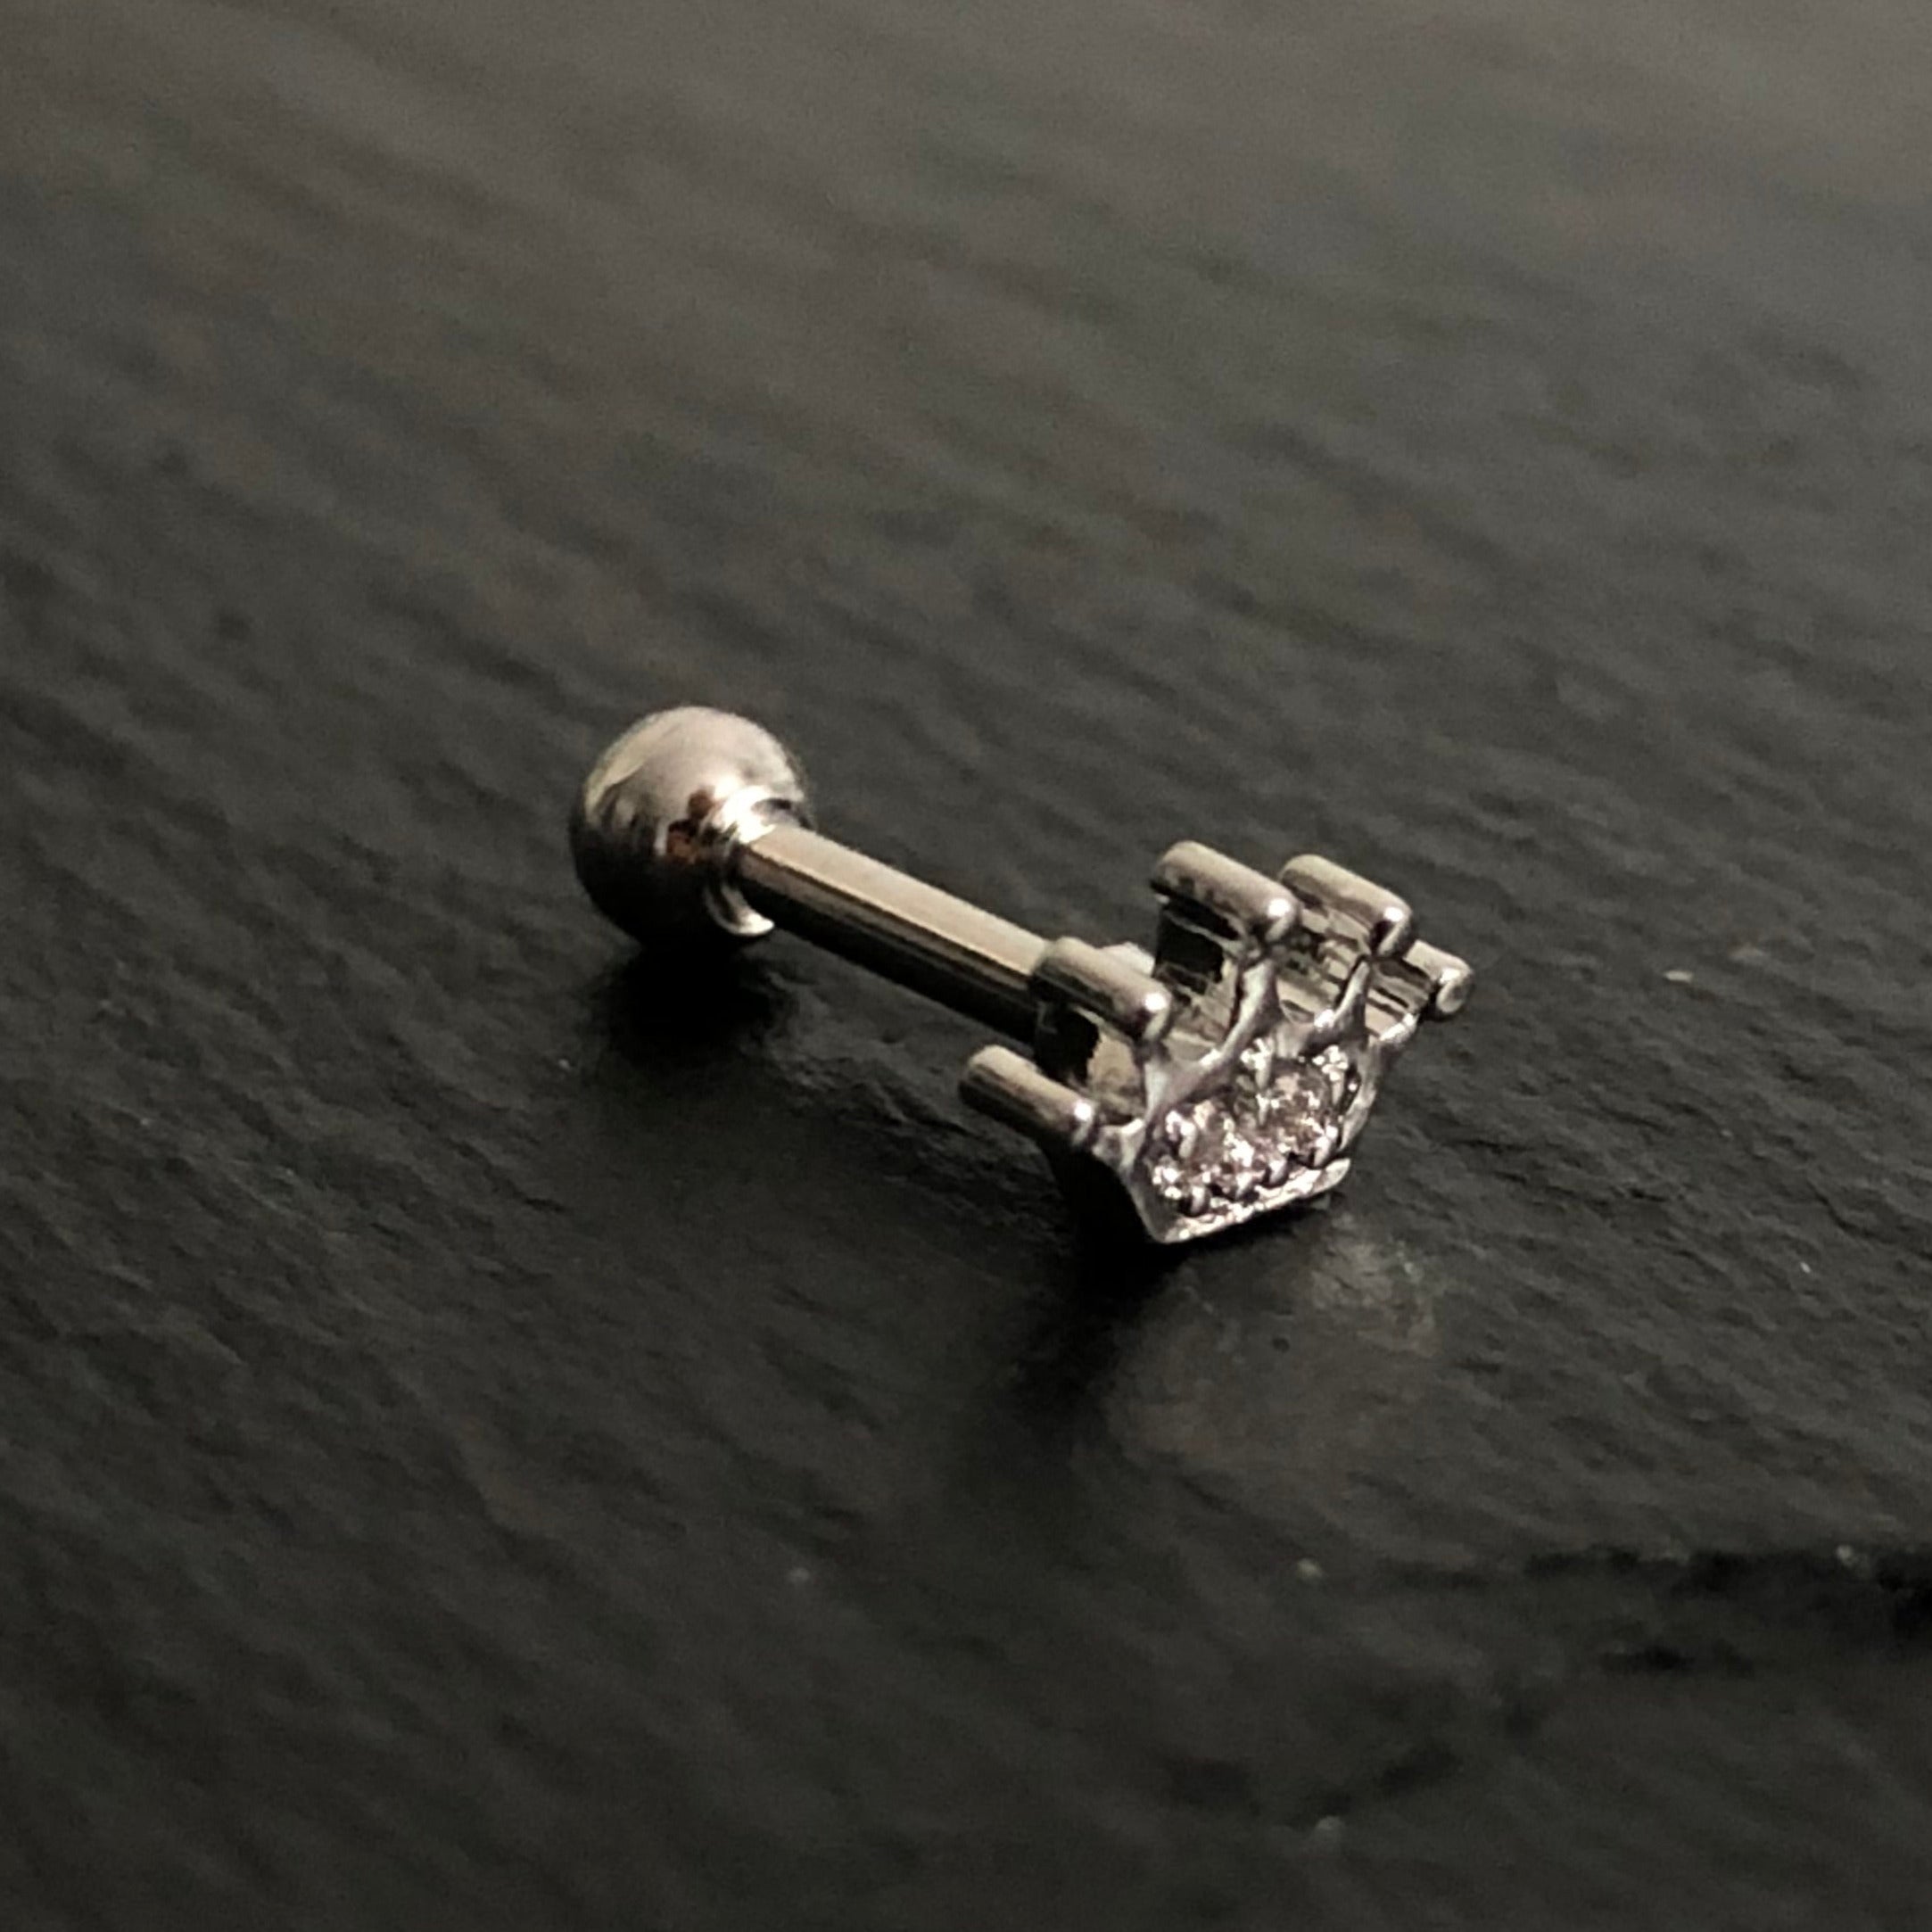 Steel barbell in crown design with crystals - CC crystal clear